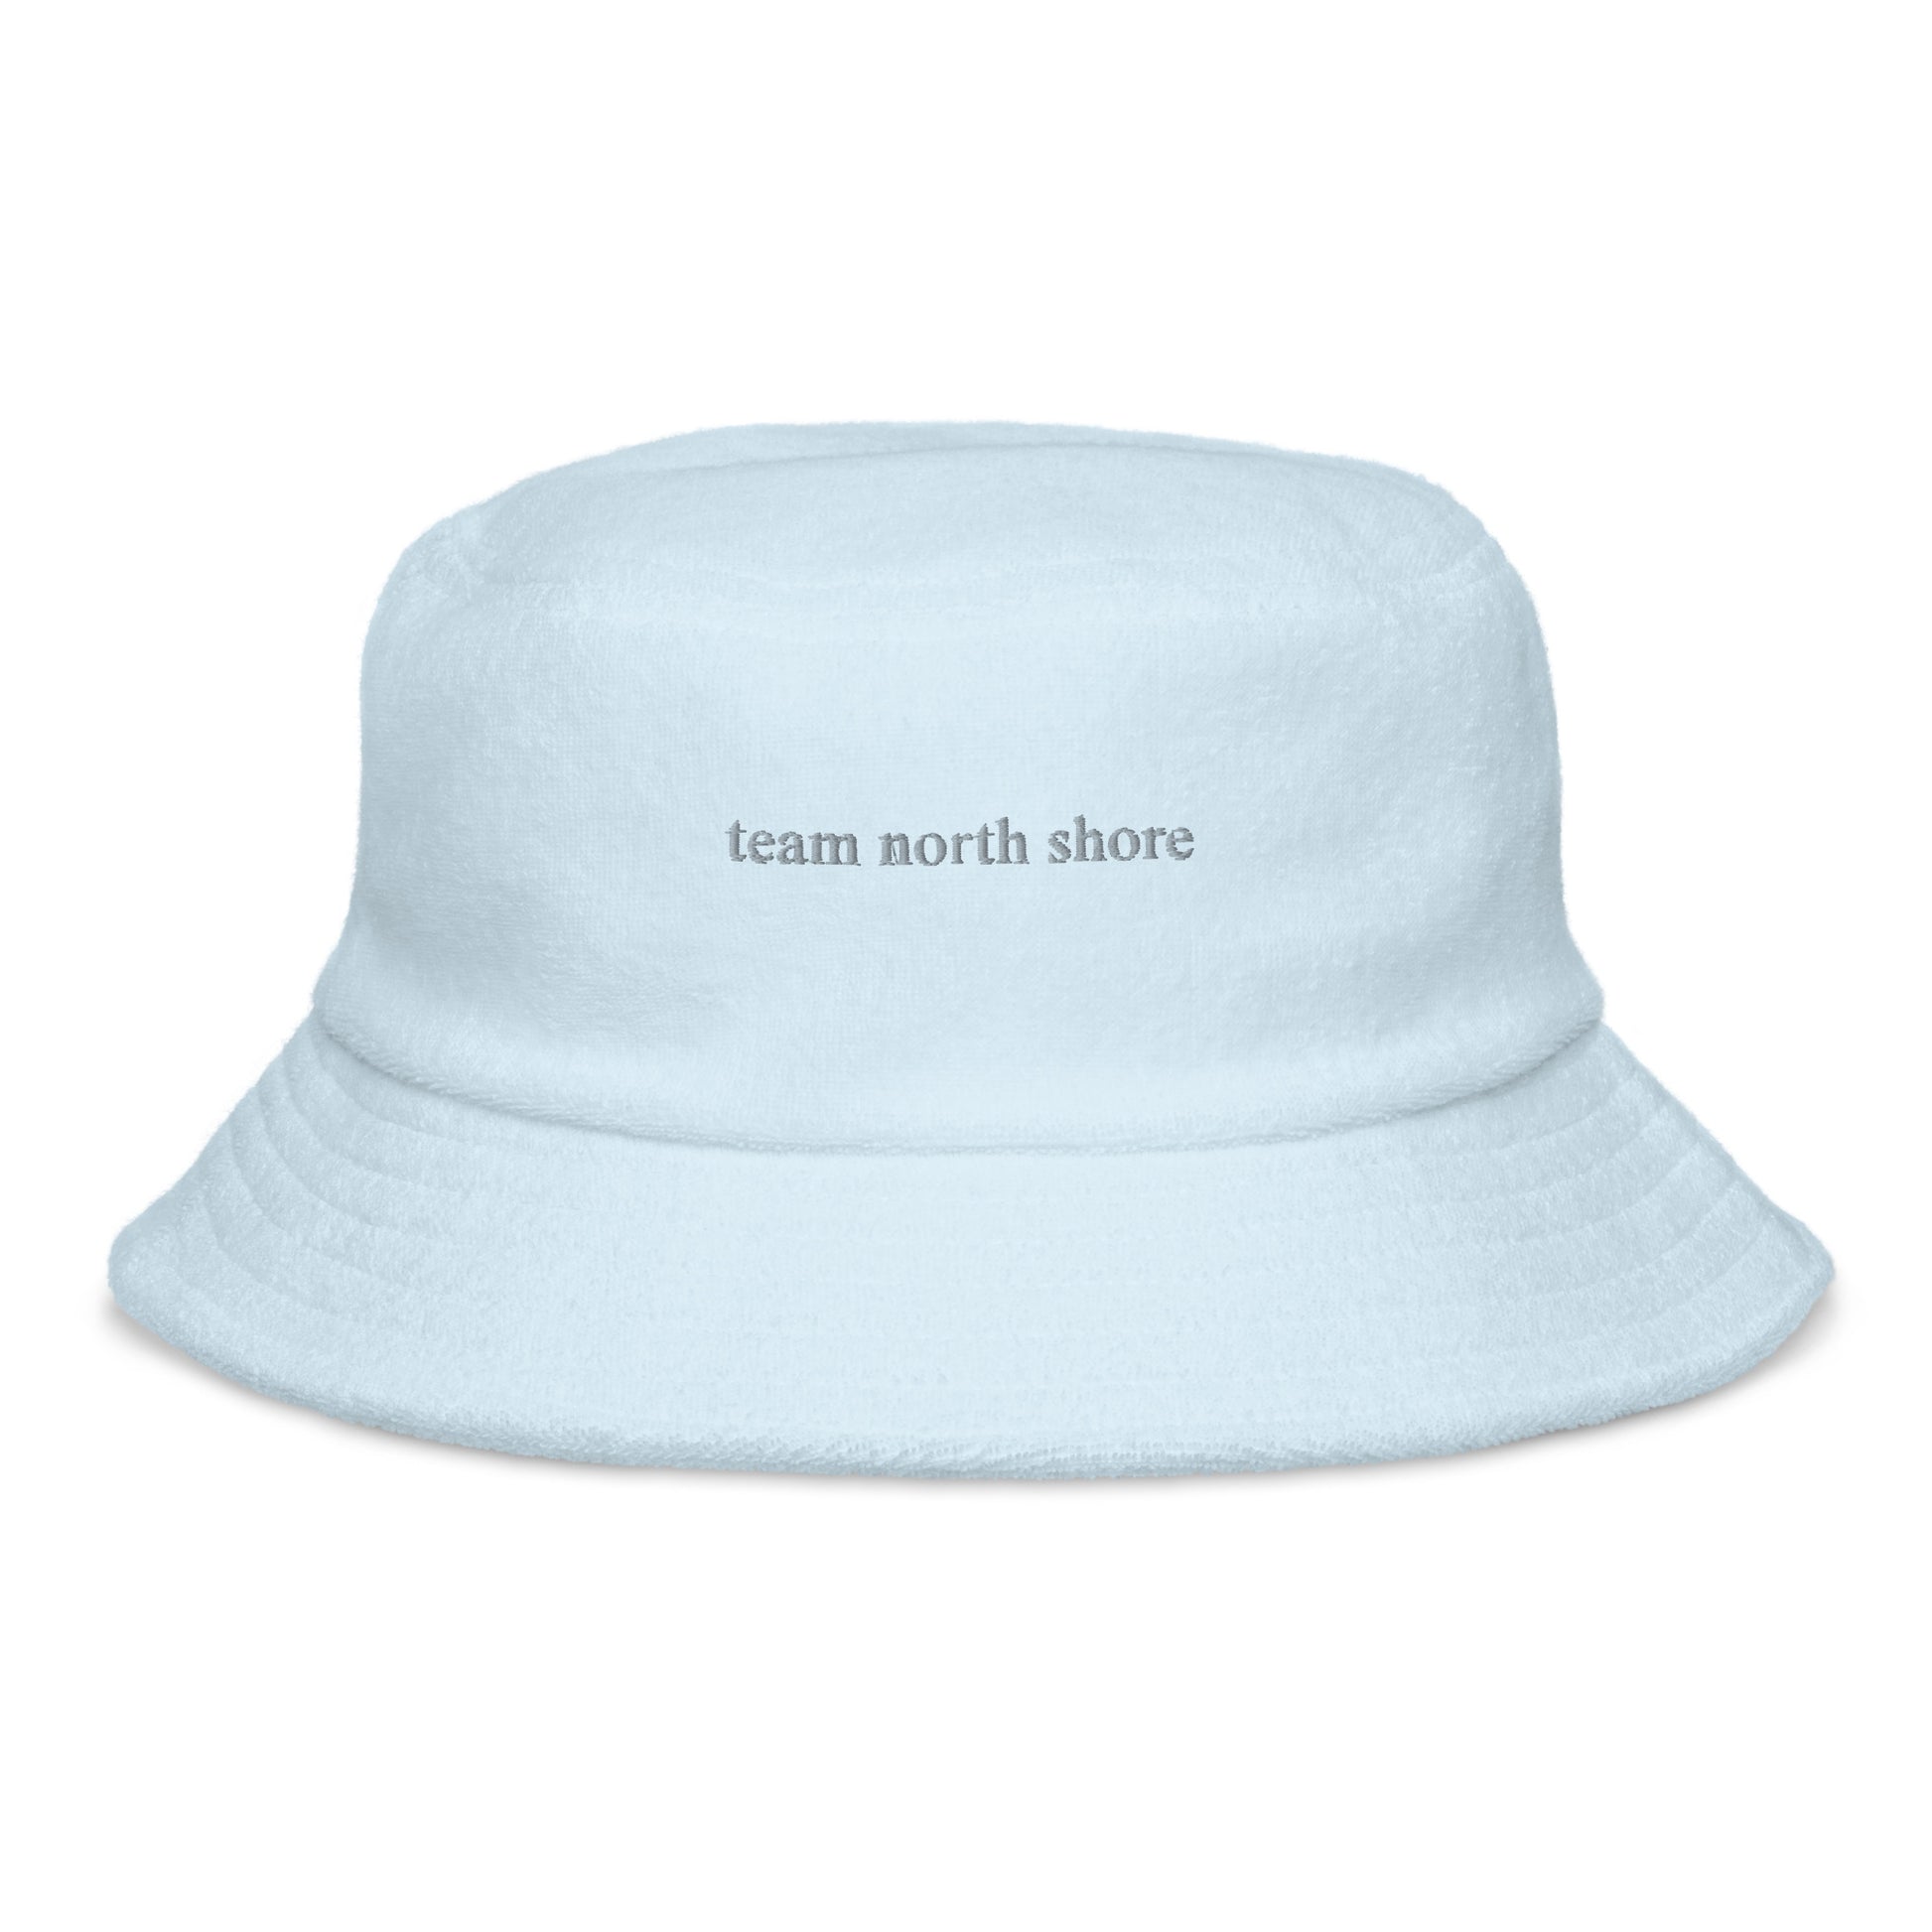 baby blue bucket hat that says "team north shore" in grey lettering